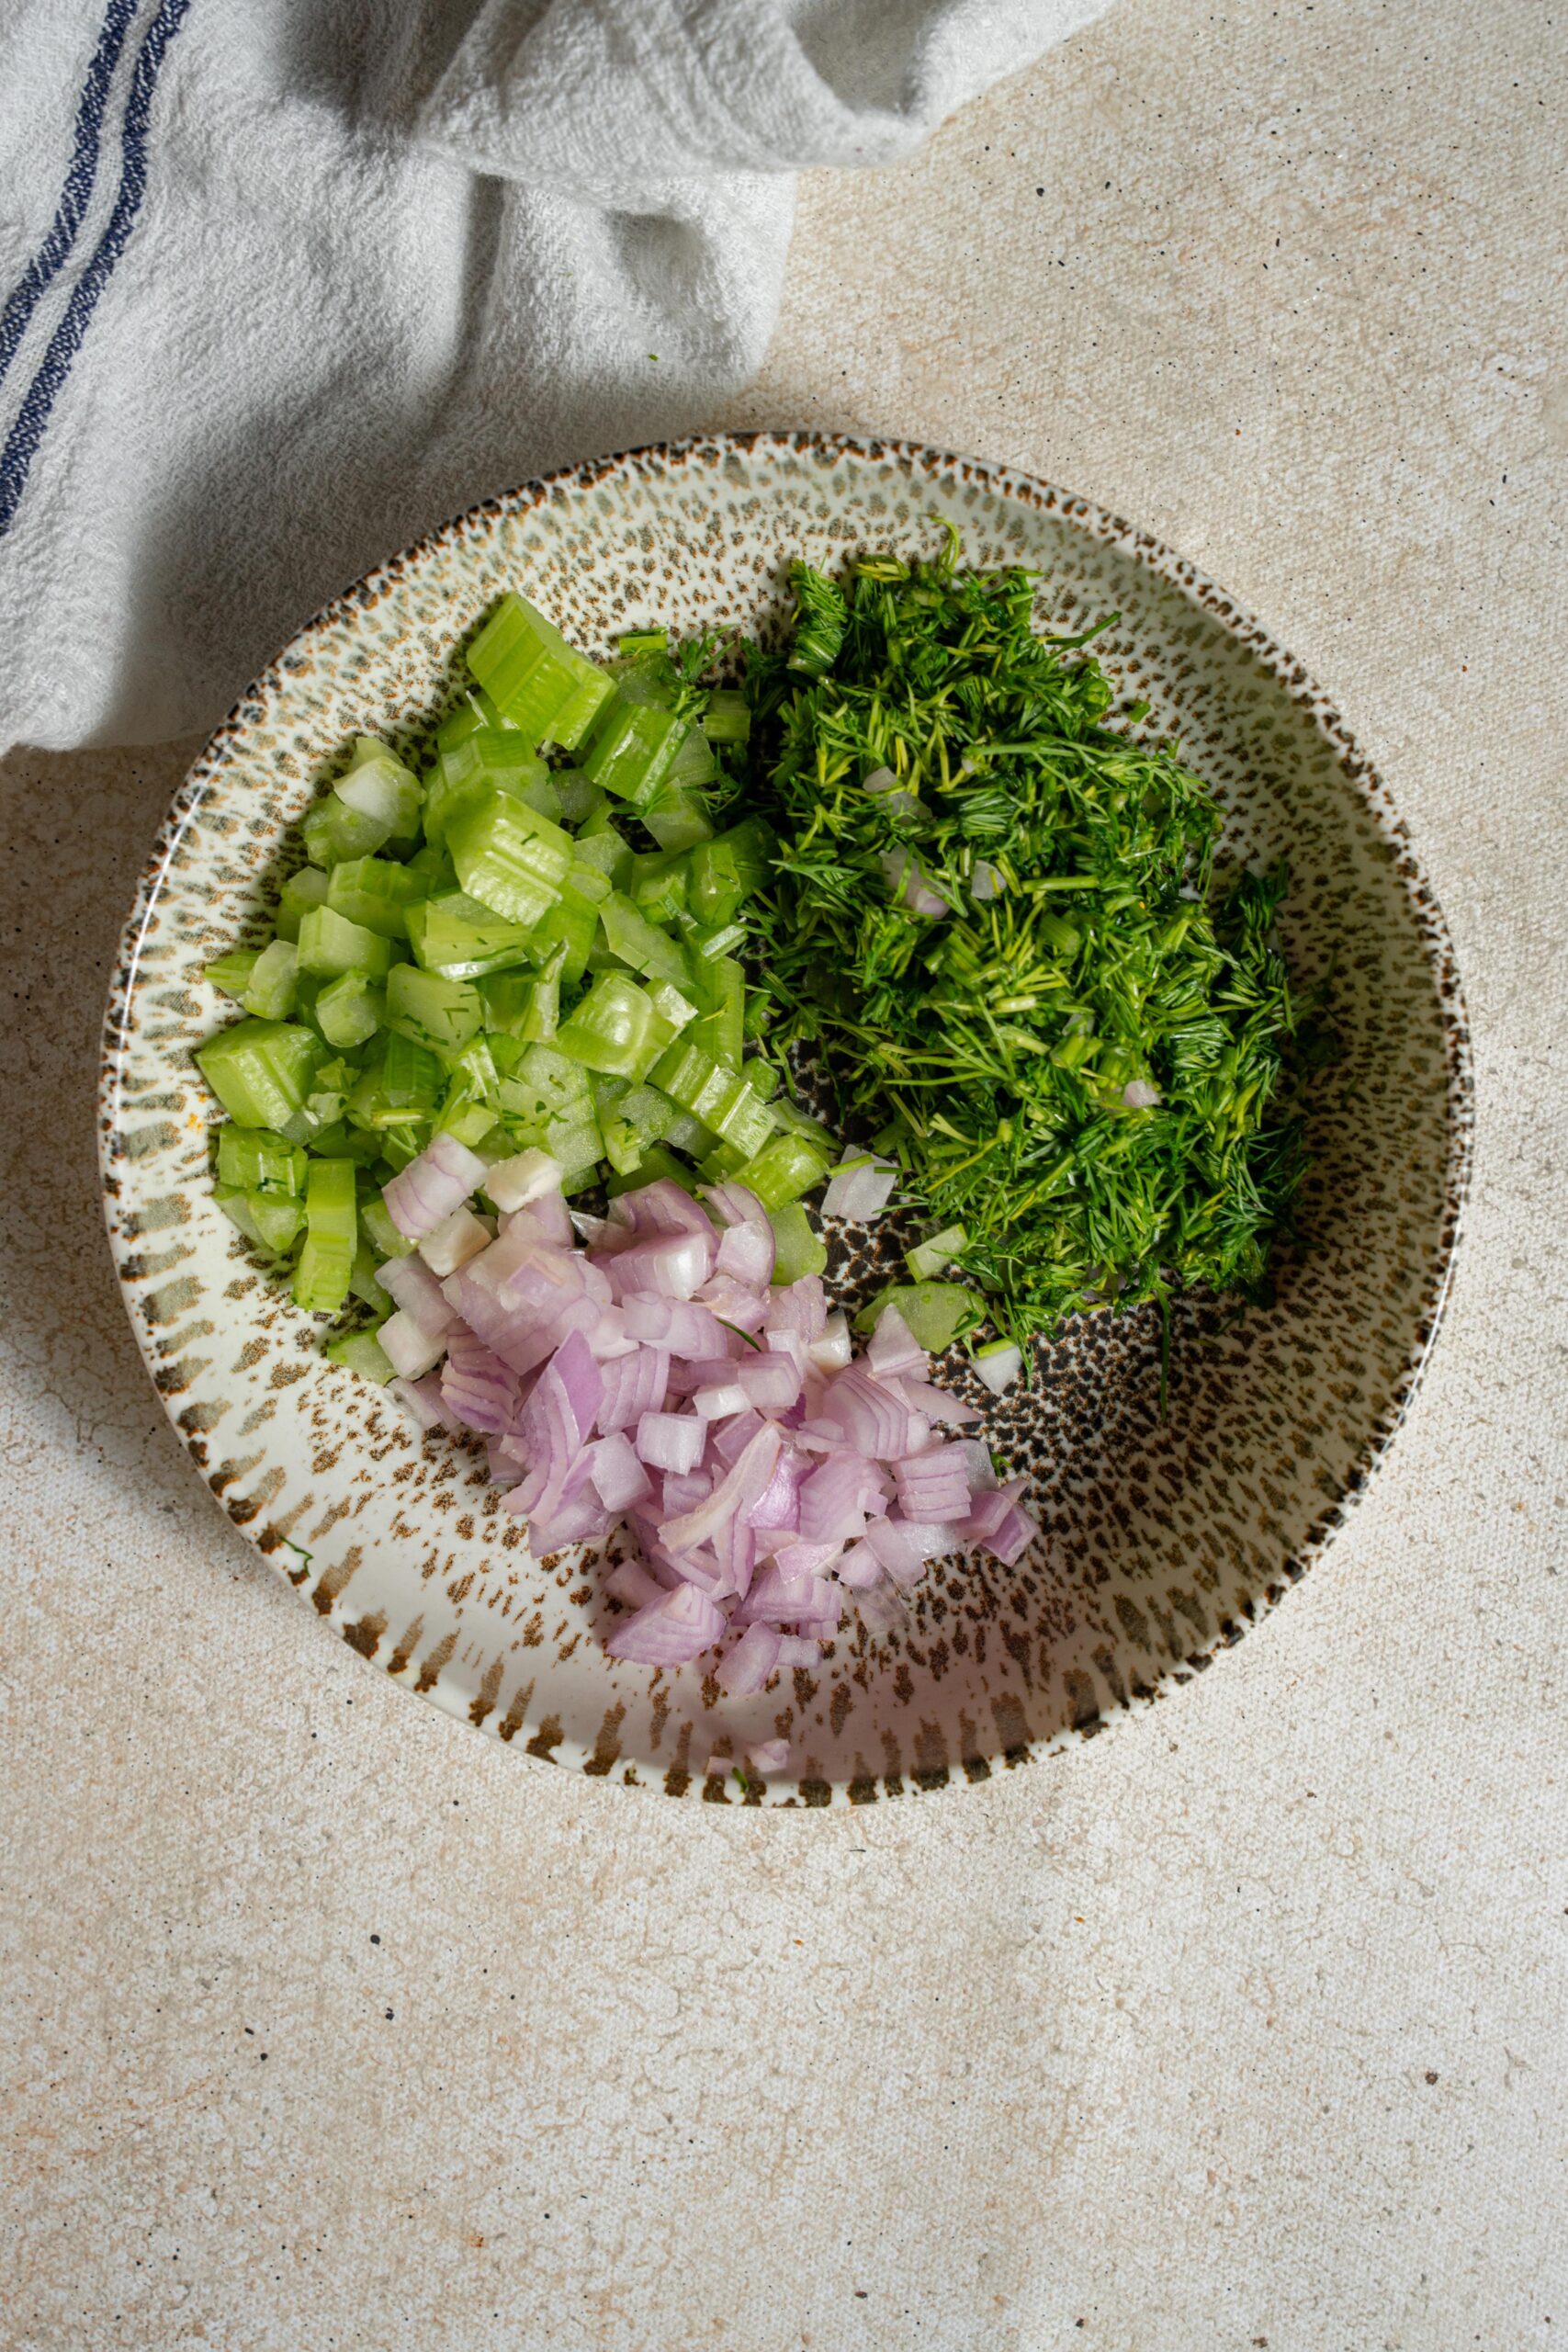 dill celery and red onion in a ceramic bowl